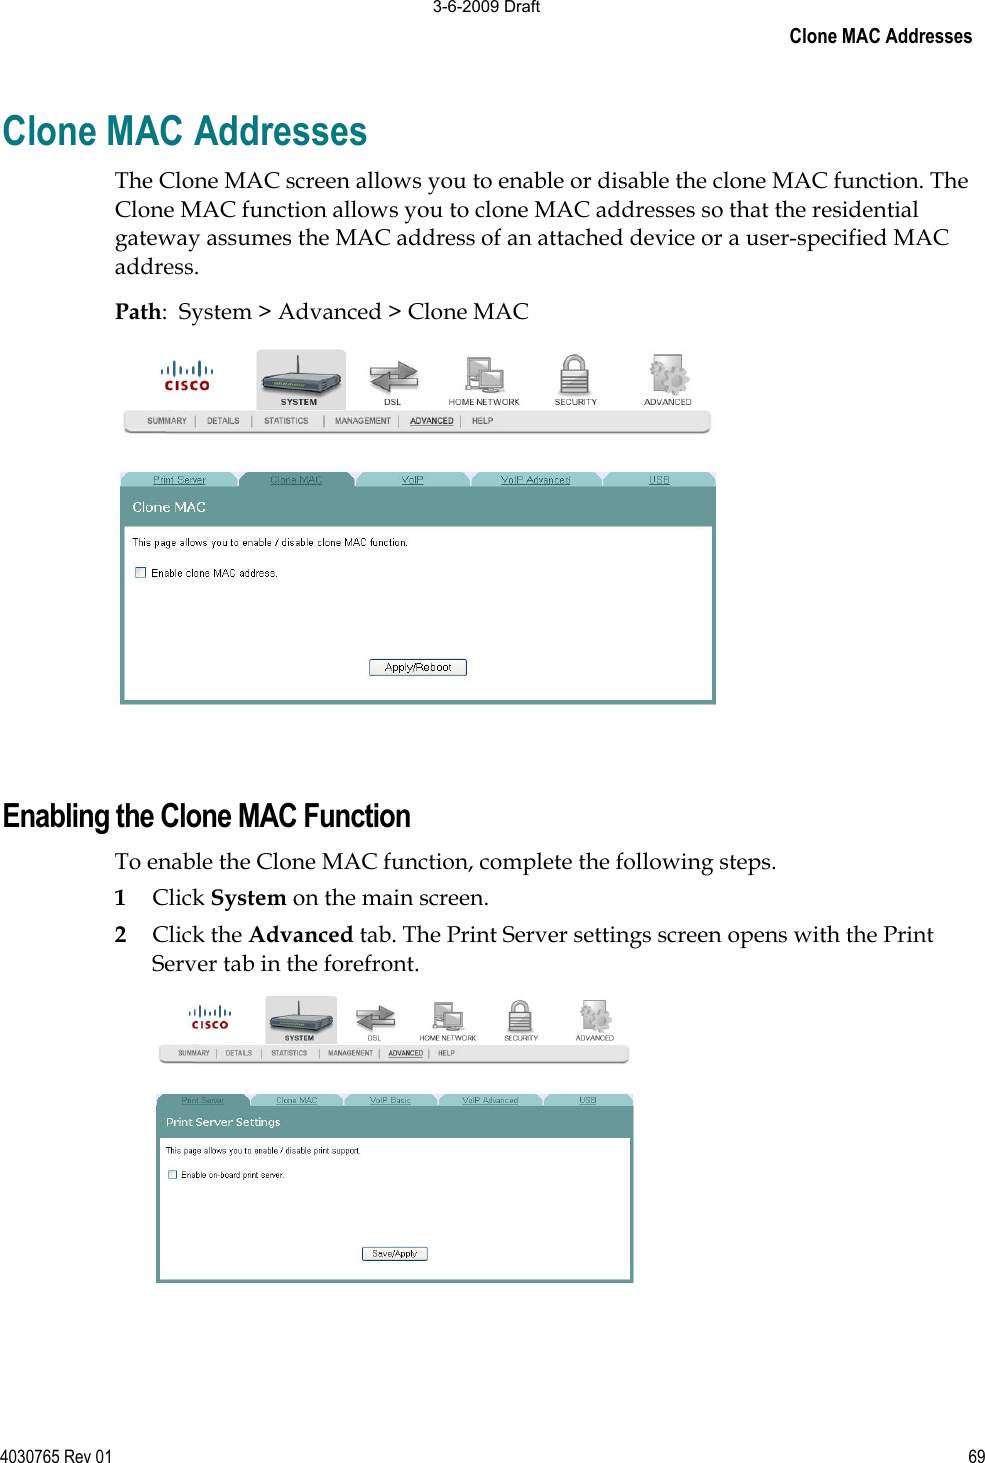 Clone MAC Addresses 4030765 Rev 01 69Clone MAC Addresses The Clone MAC screen allows you to enable or disable the clone MAC function. The Clone MAC function allows you to clone MAC addresses so that the residential gateway assumes the MAC address of an attached device or a user-specified MAC address. Path:  System &gt; Advanced &gt; Clone MAC Enabling the Clone MAC Function To enable the Clone MAC function, complete the following steps. 1Click System on the main screen.  2Click the Advanced tab. The Print Server settings screen opens with the Print Server tab in the forefront. 3-6-2009 Draft